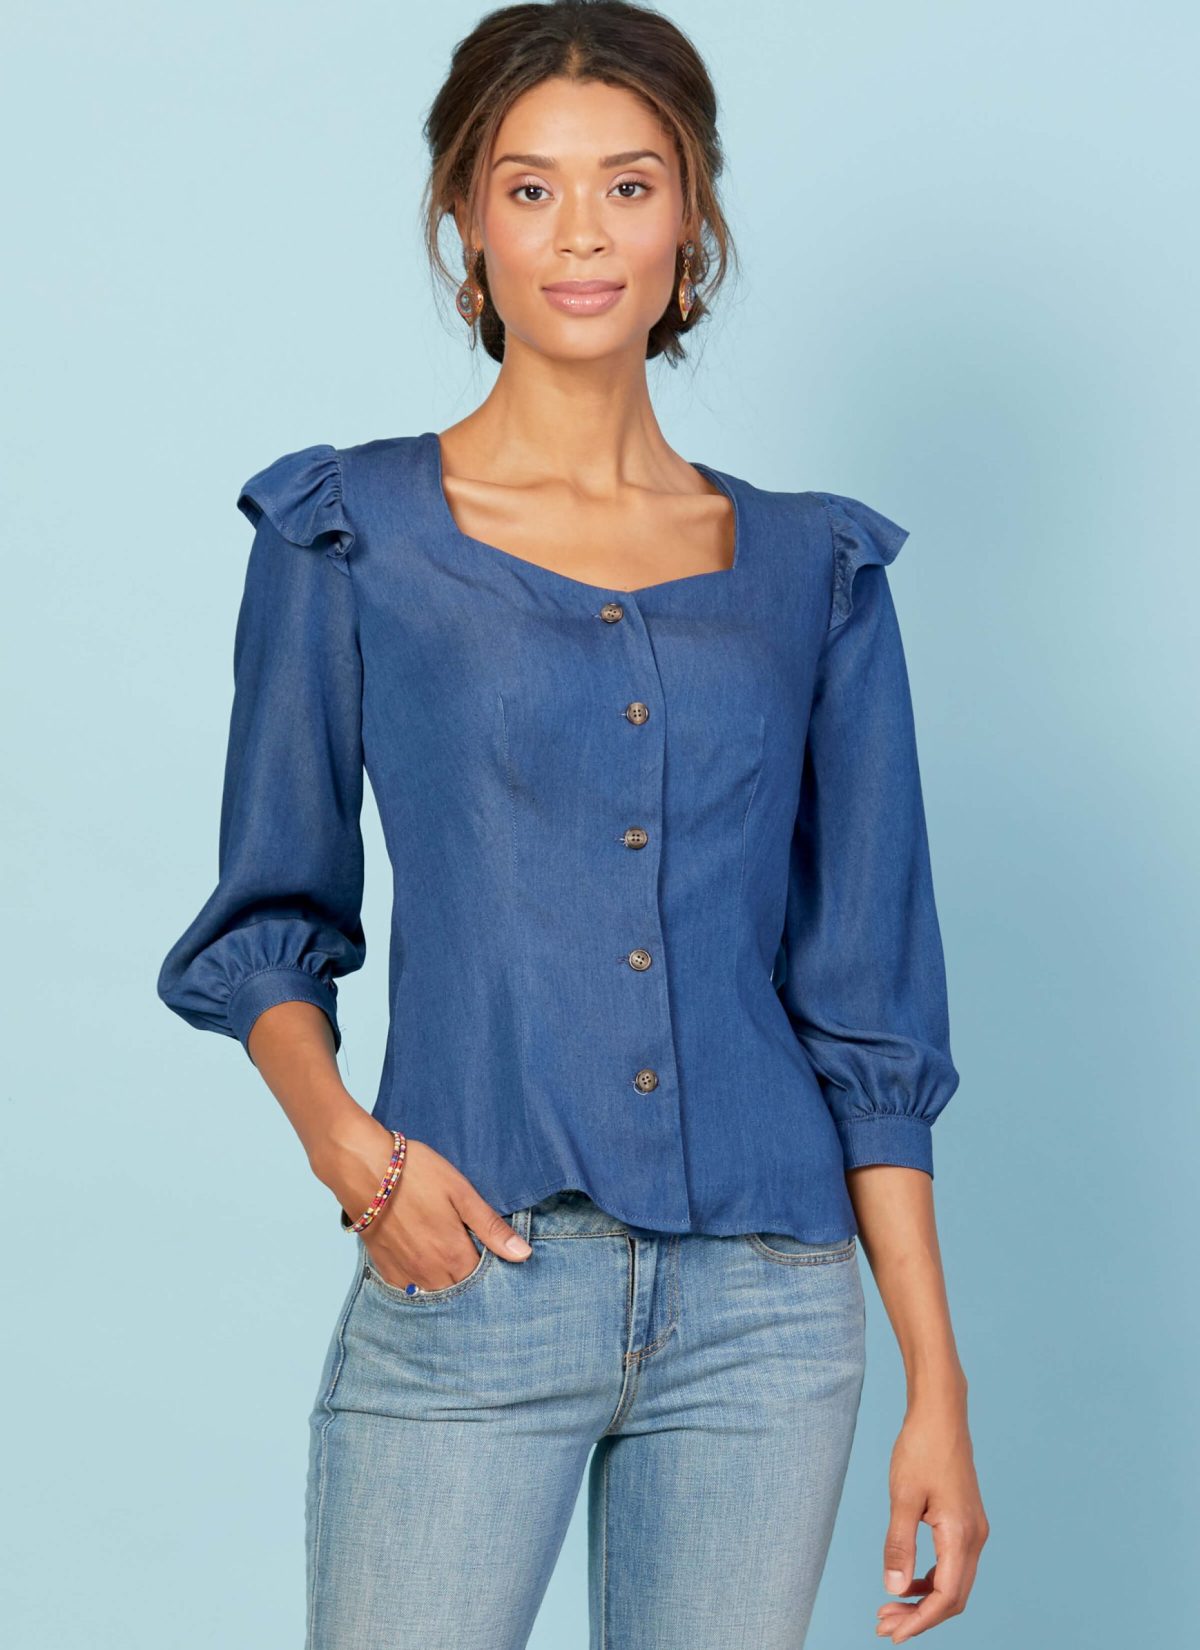 McCall's Sewing Pattern M7900 Misses' Tops